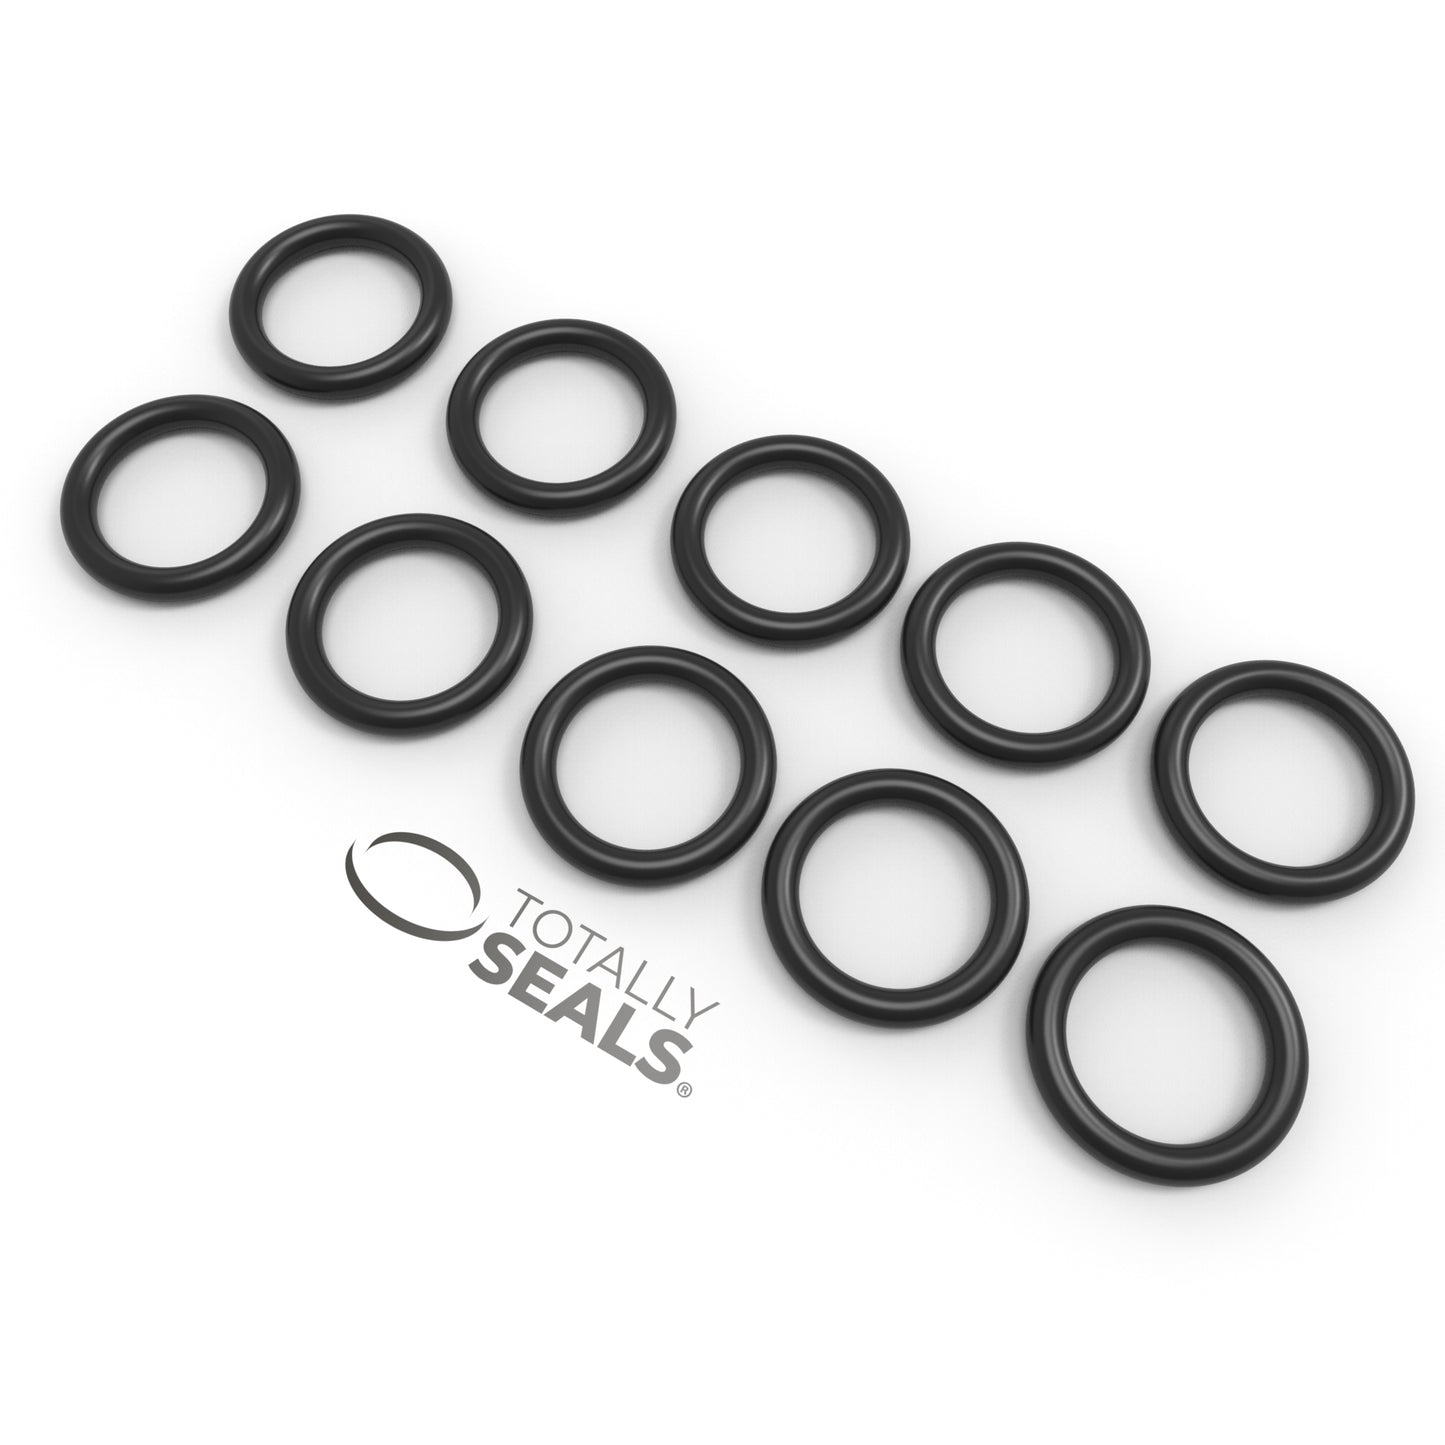 50mm x 2.5mm (55mm OD) Nitrile O-Rings - Totally Seals®